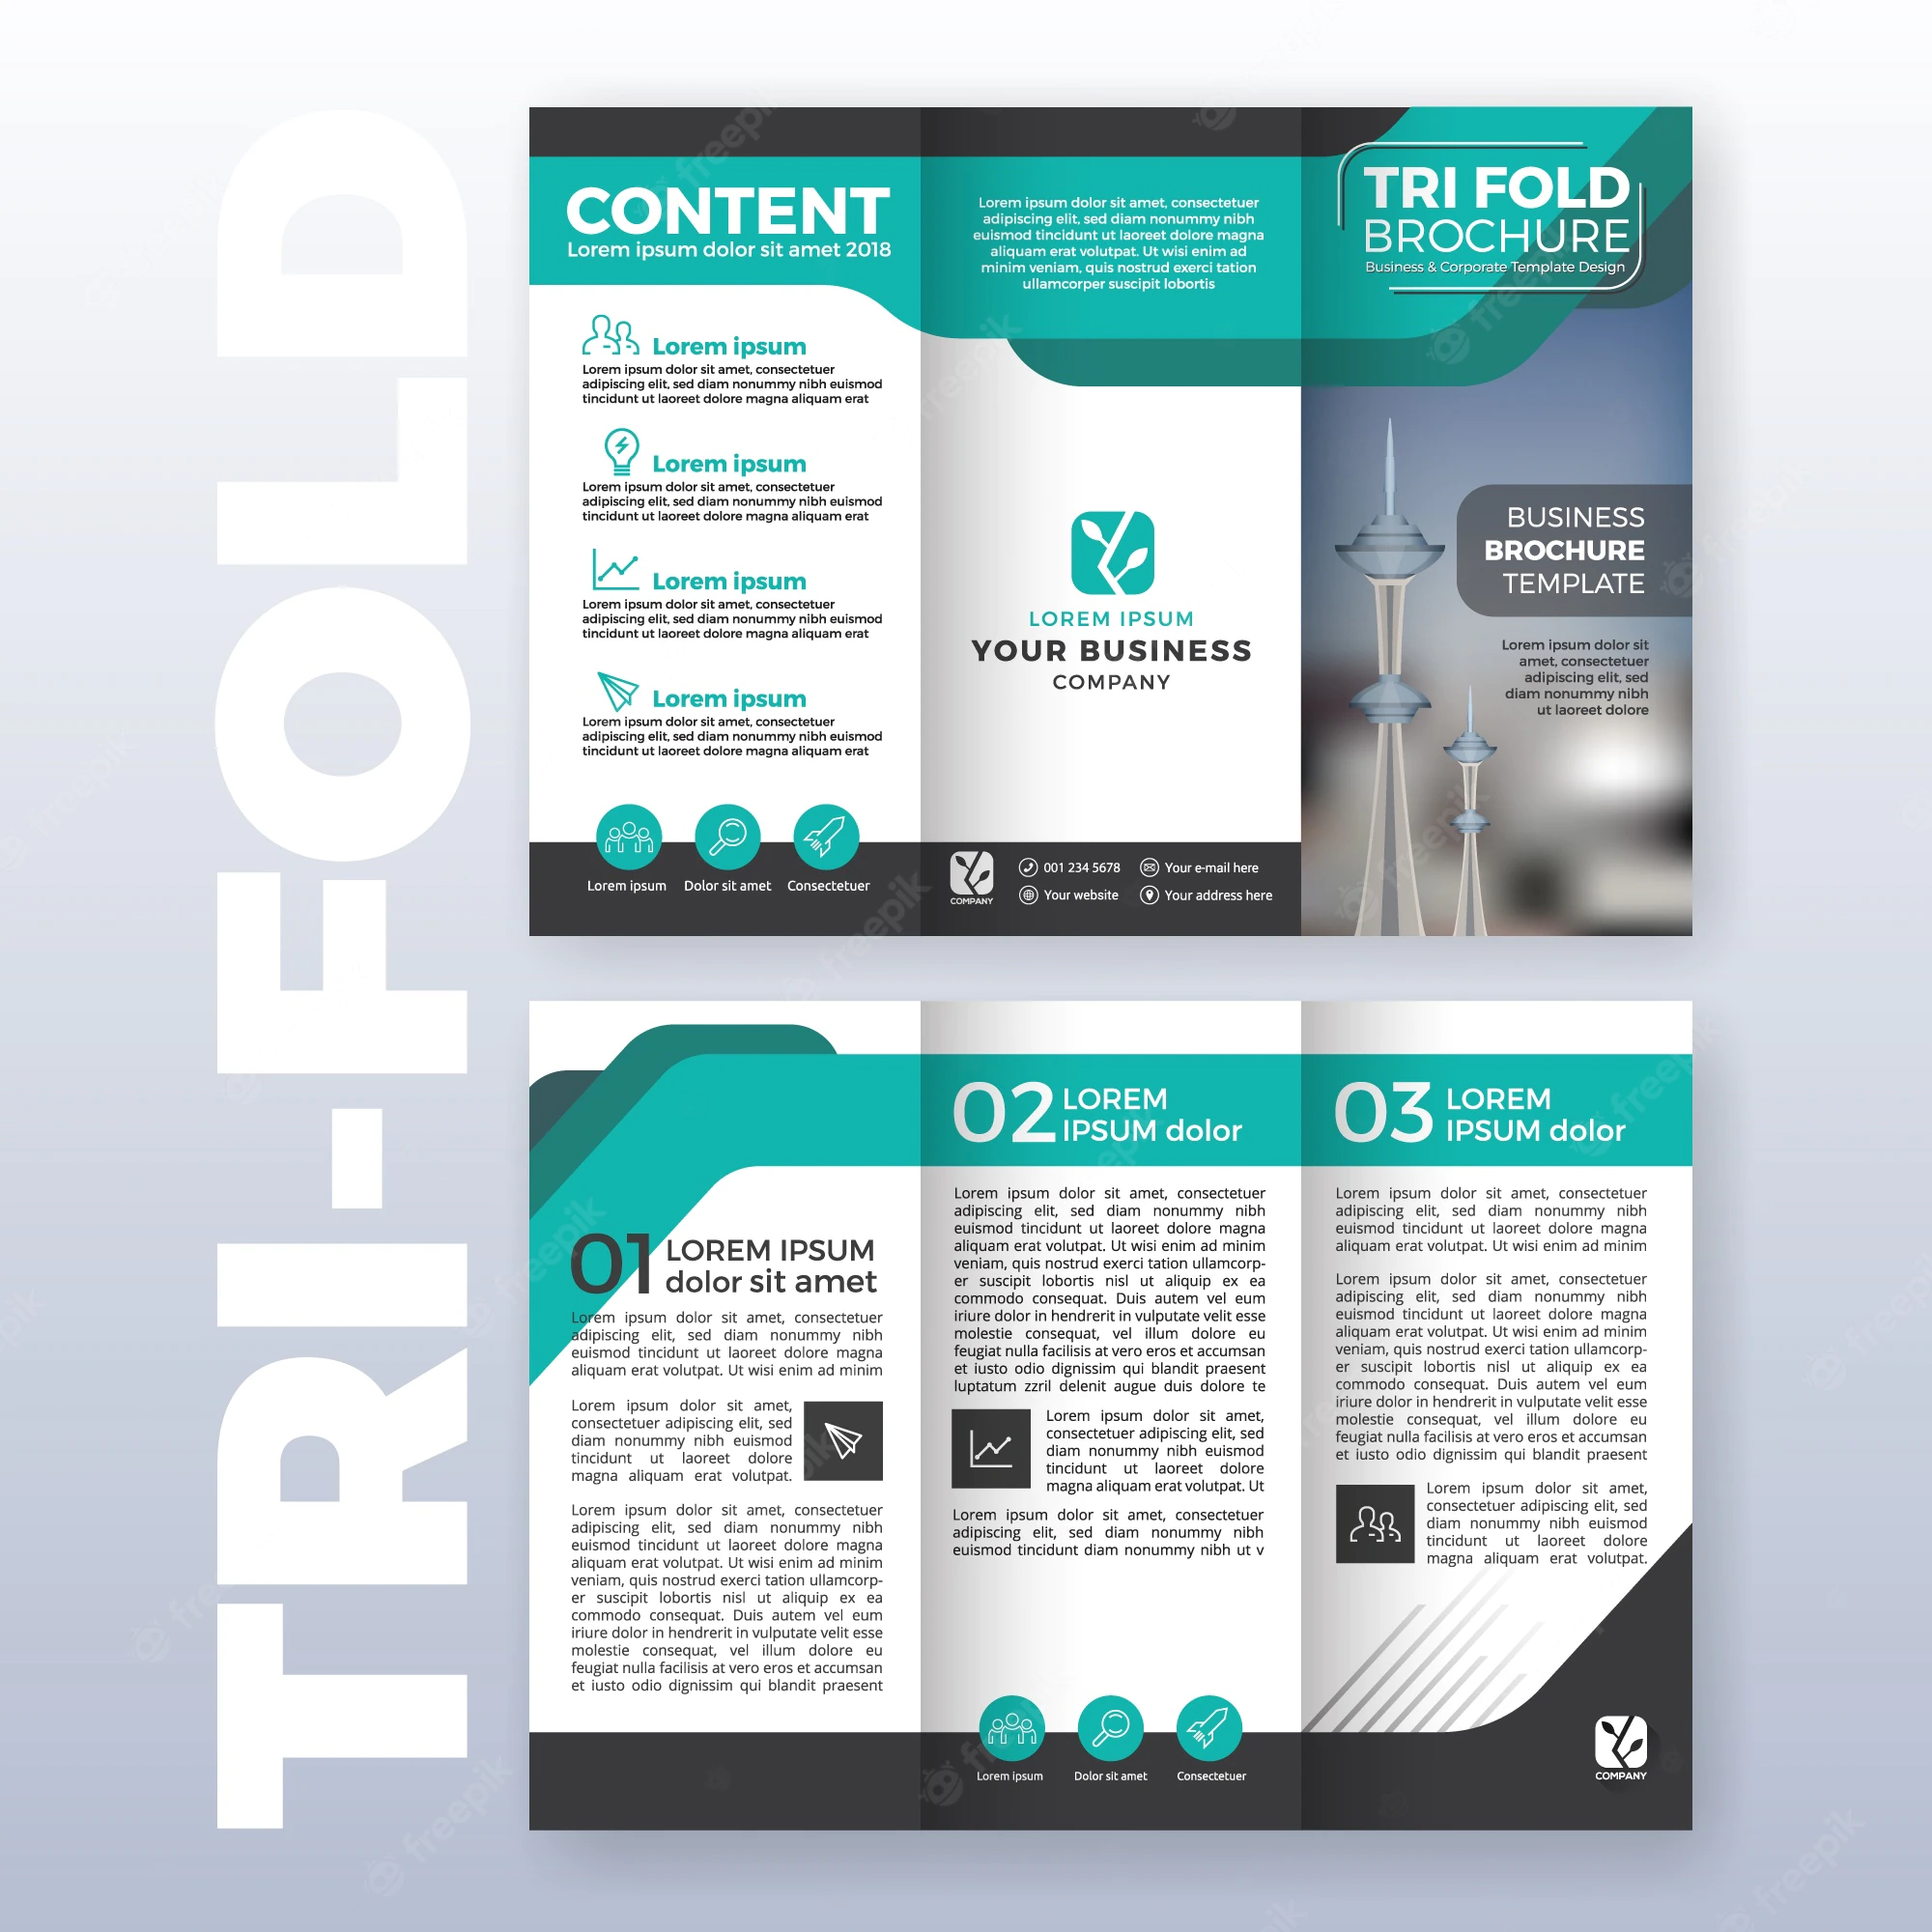 business-tri-fold-brochure-template-design-with-turquoise-color-scheme-a4-size-layout-with-bleeds_1198-358